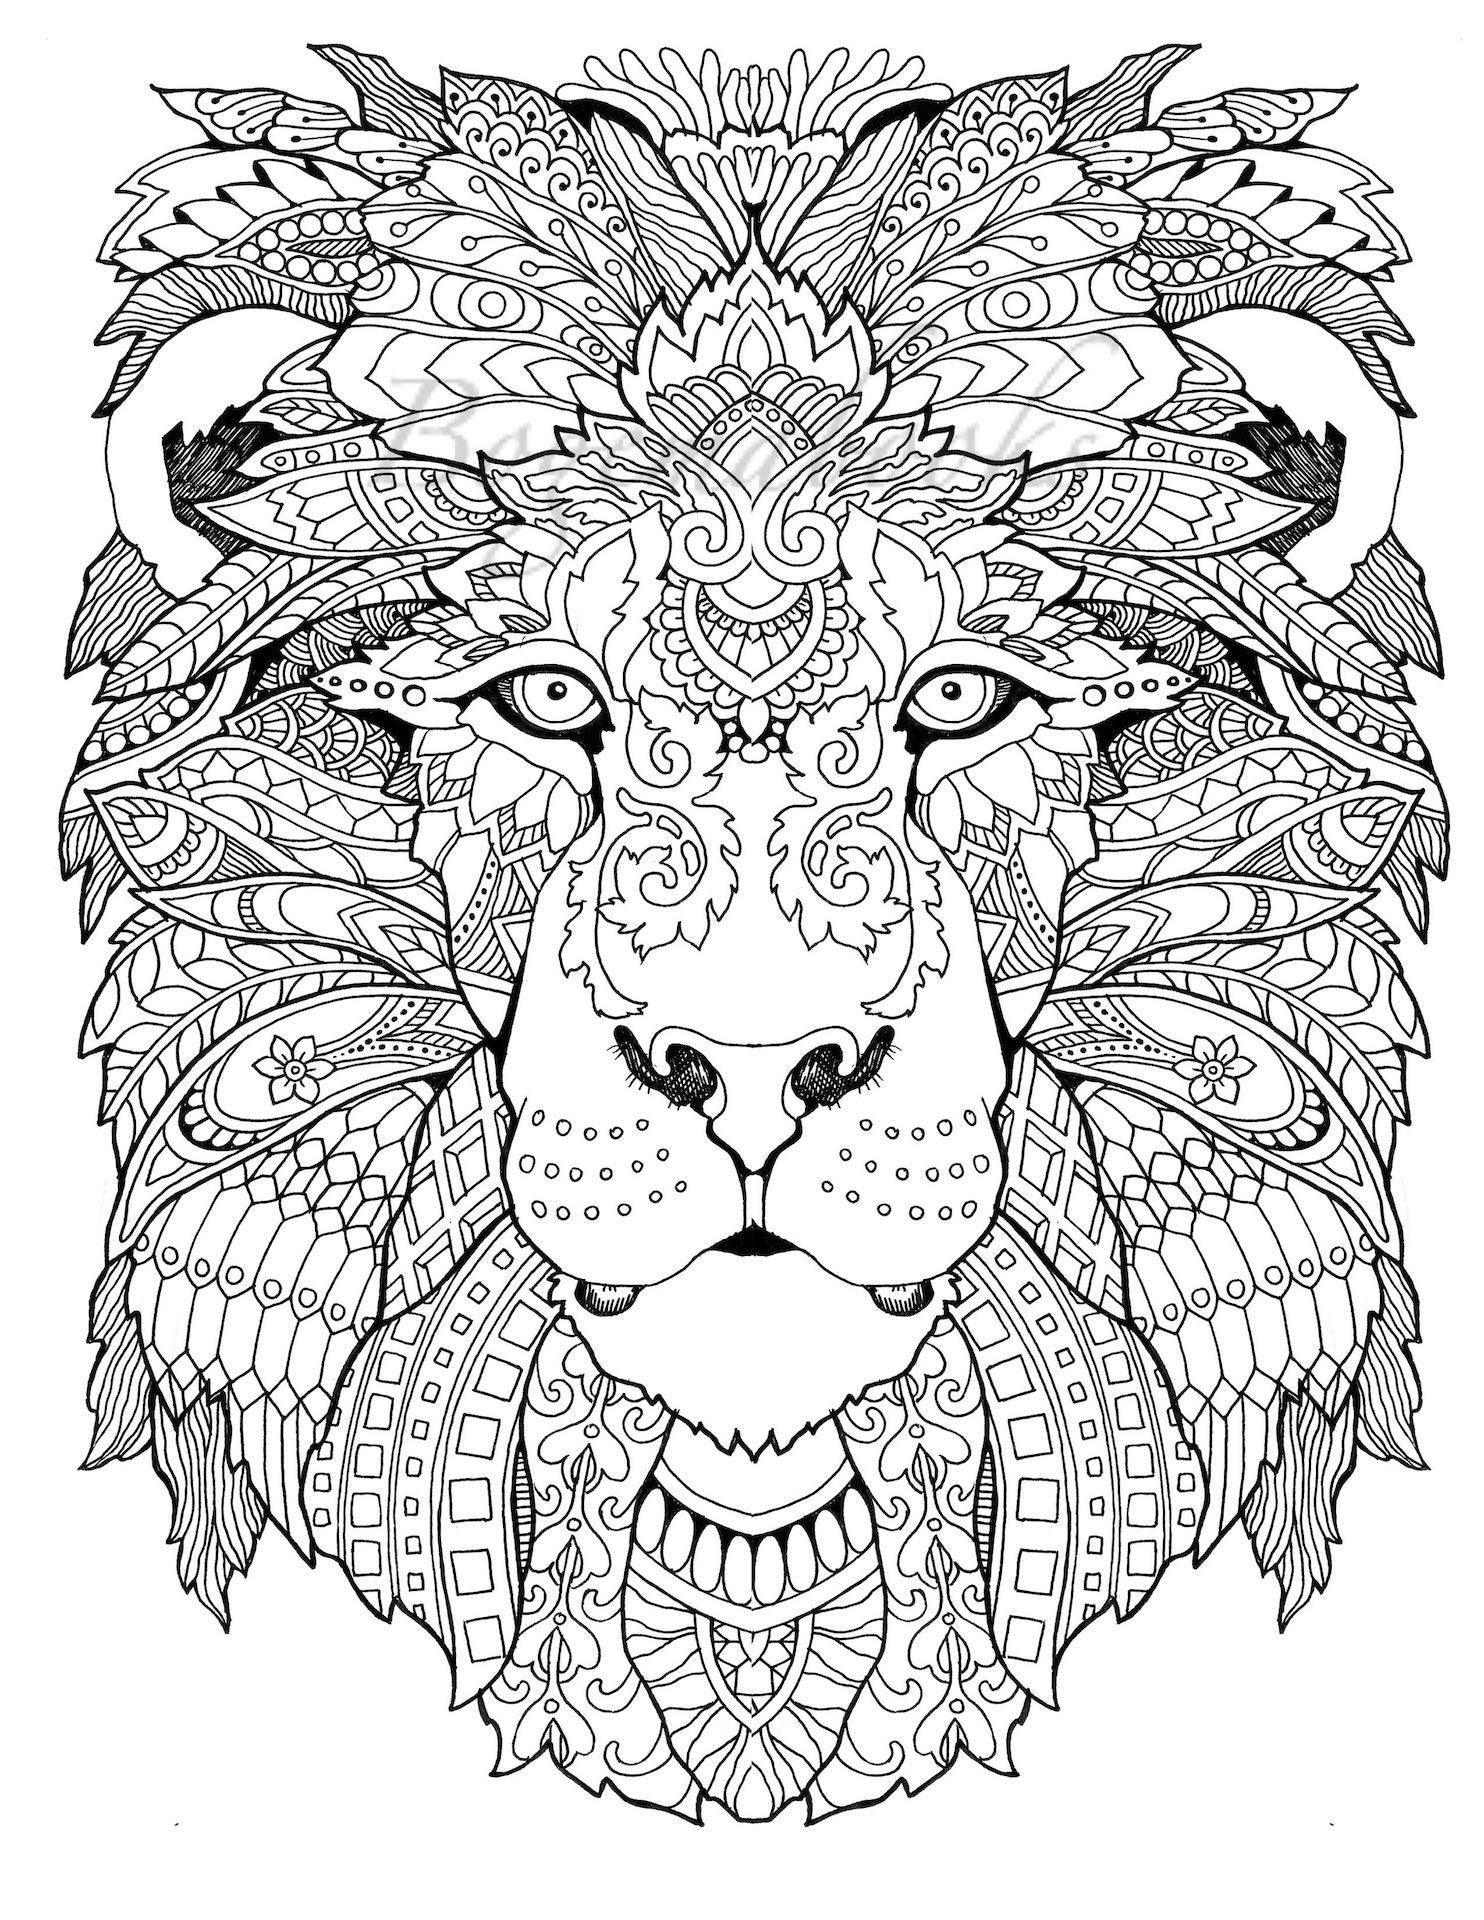 Free Pdf Coloring Pages For Adults
 Awesome Animals Adult Coloring Book Coloring pages PDF